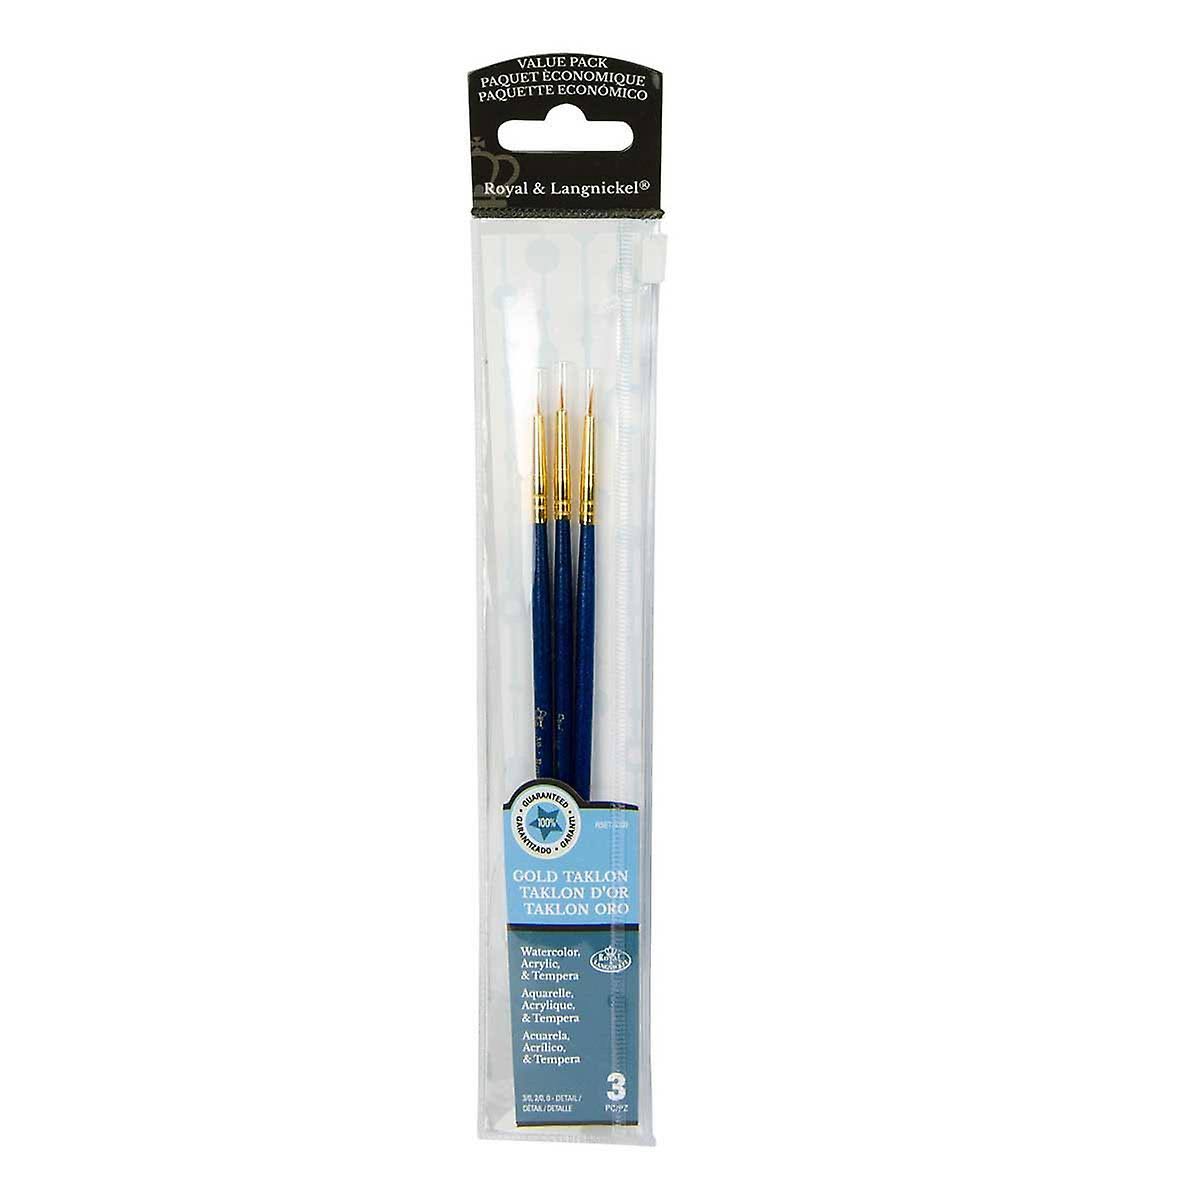 Royal & Langnickel Brush Value Pack With Free Pouch